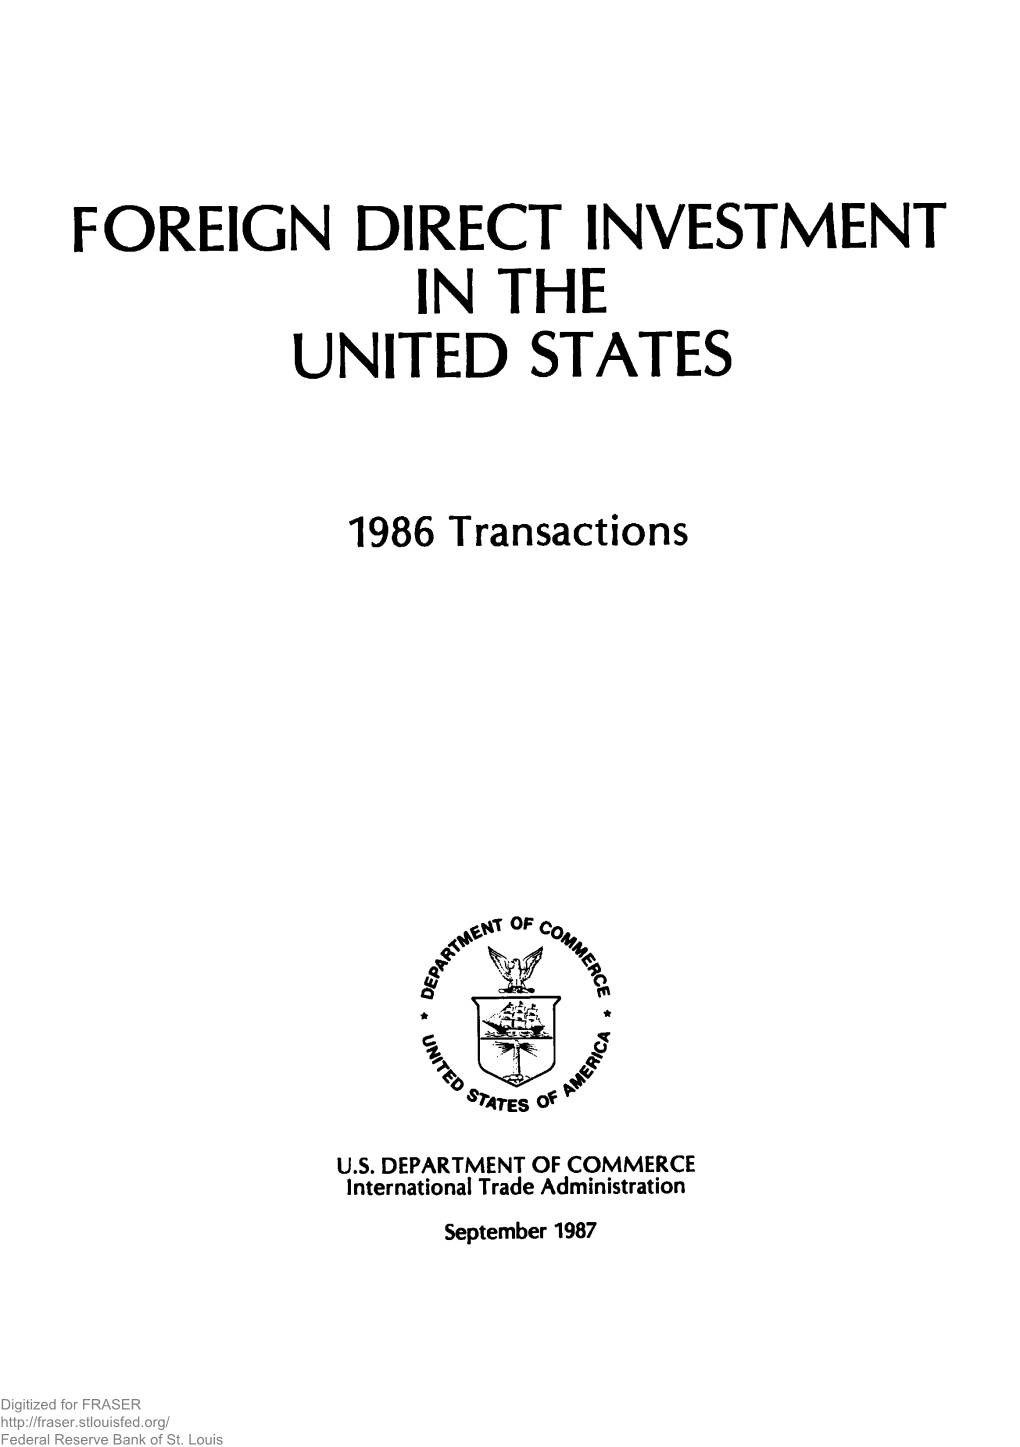 Foreign Direct Investment in the United States. Transactions